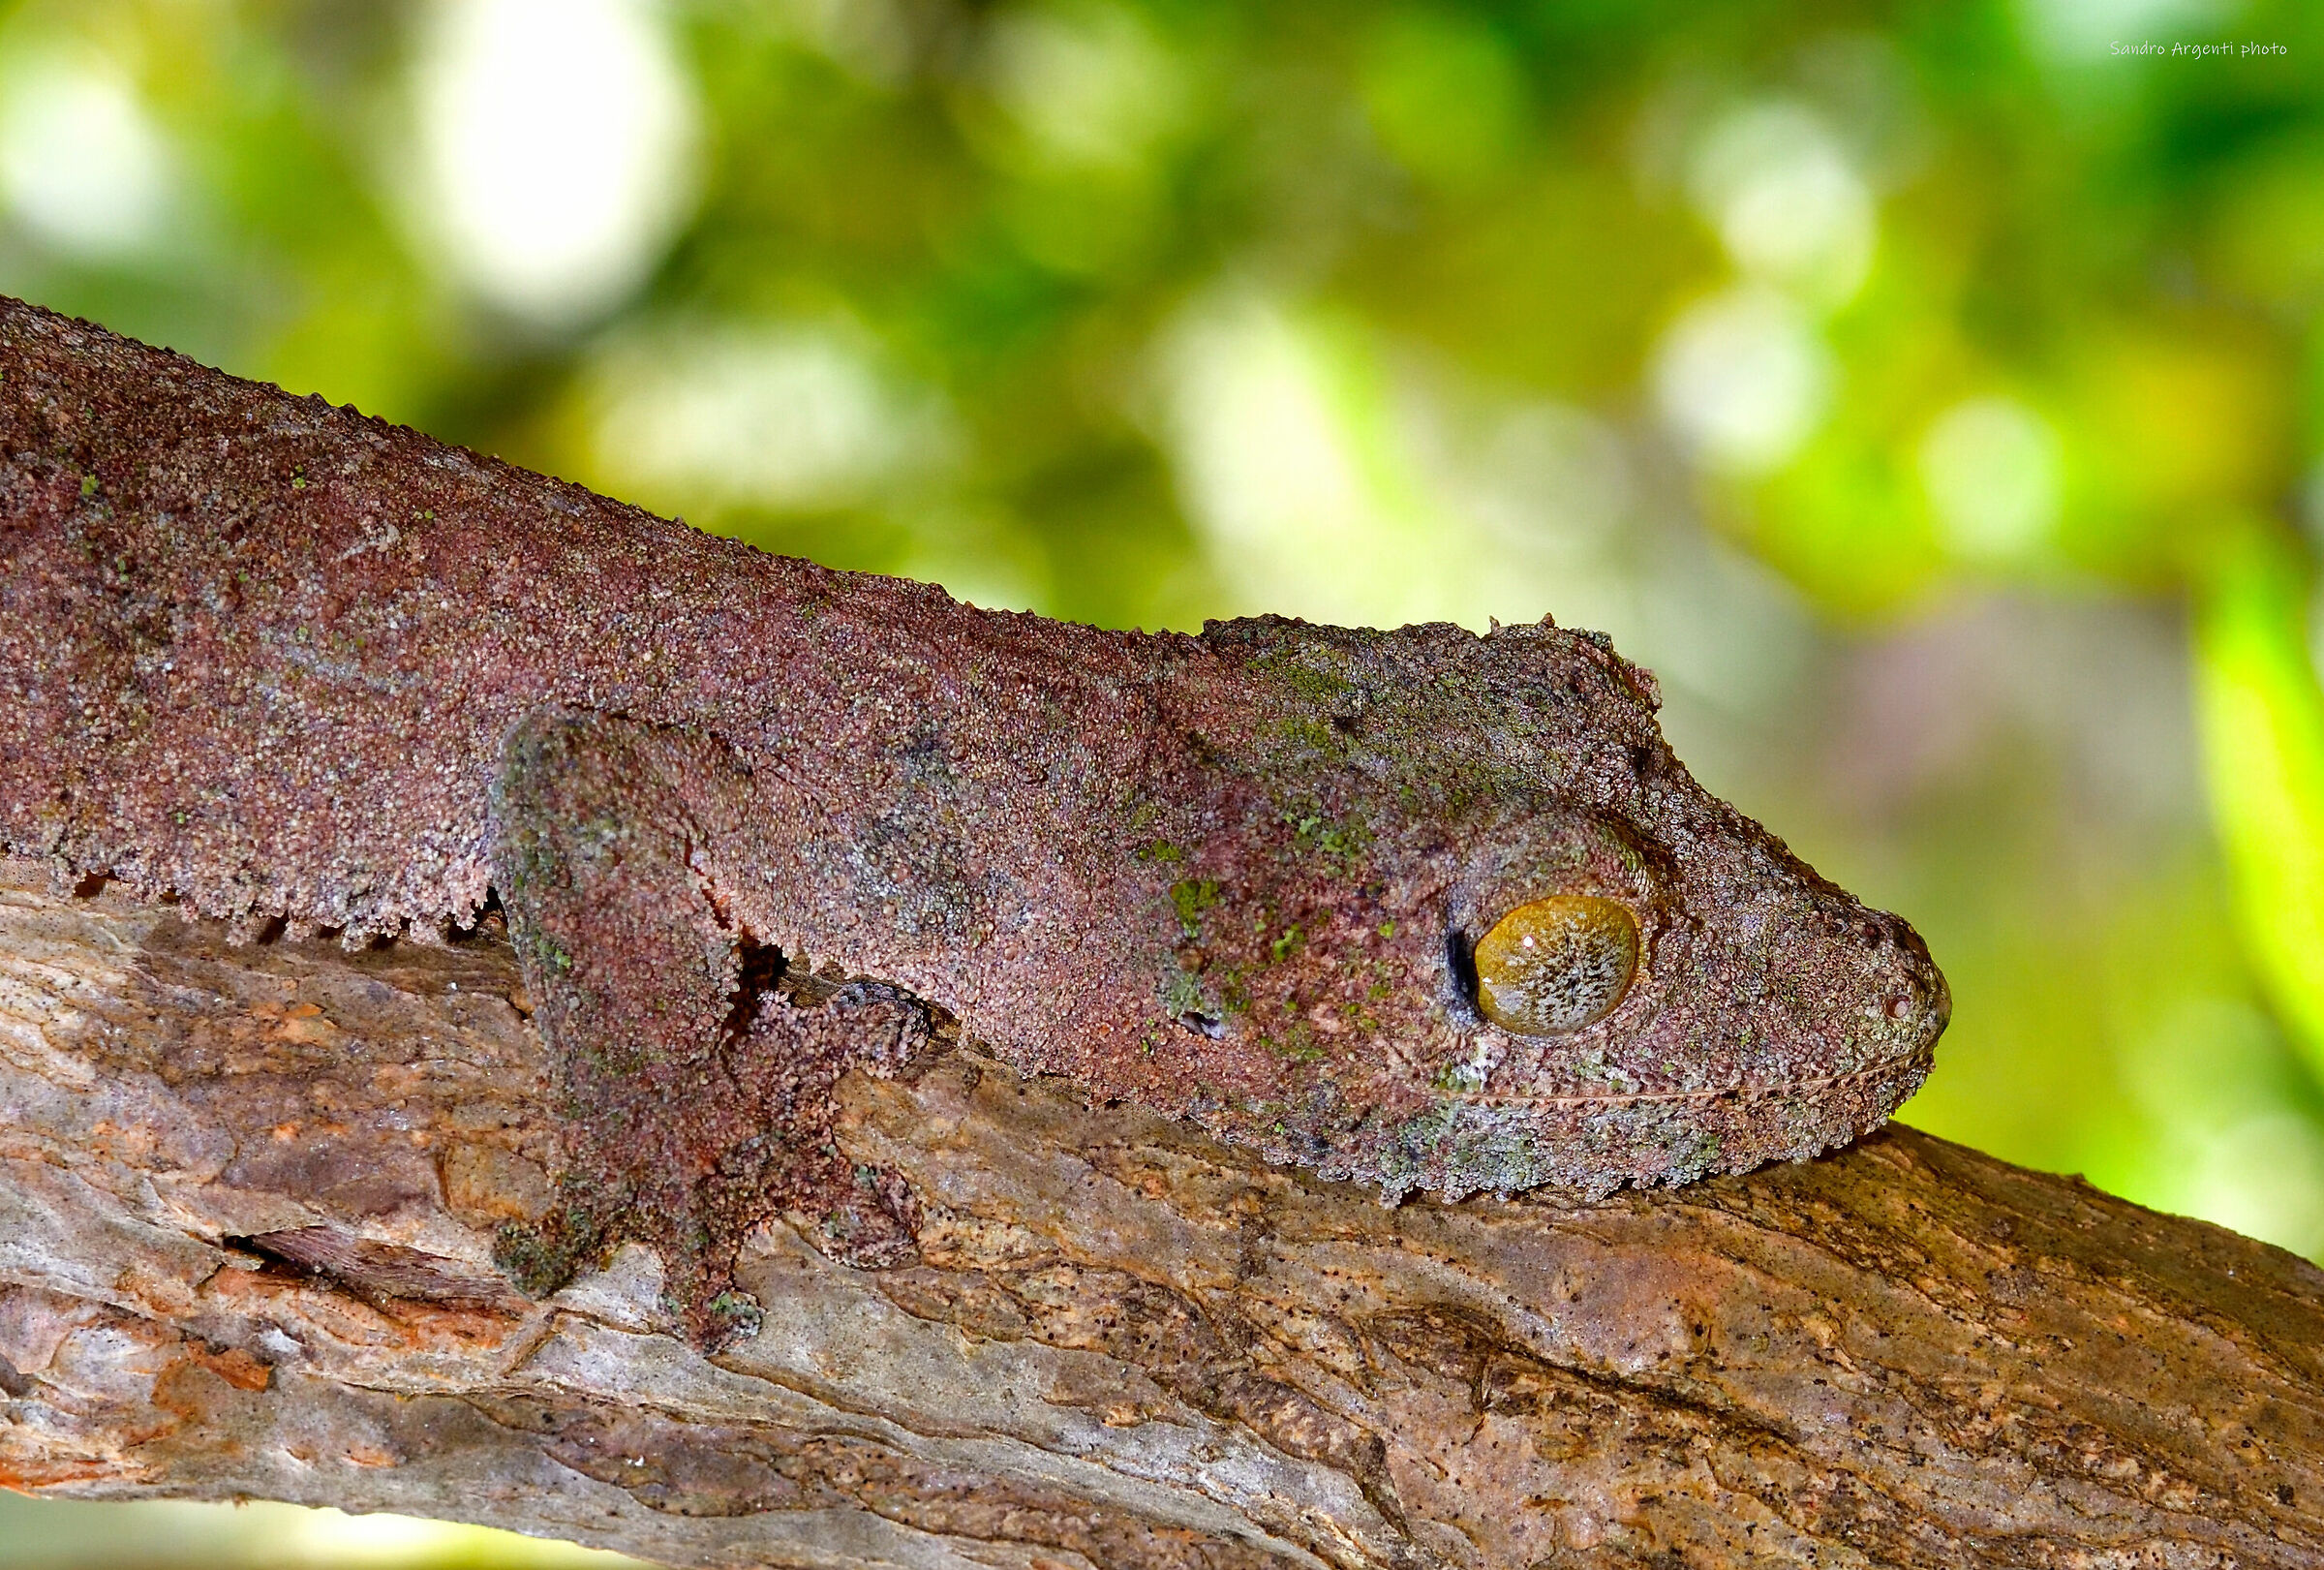 Gecko camouflage...